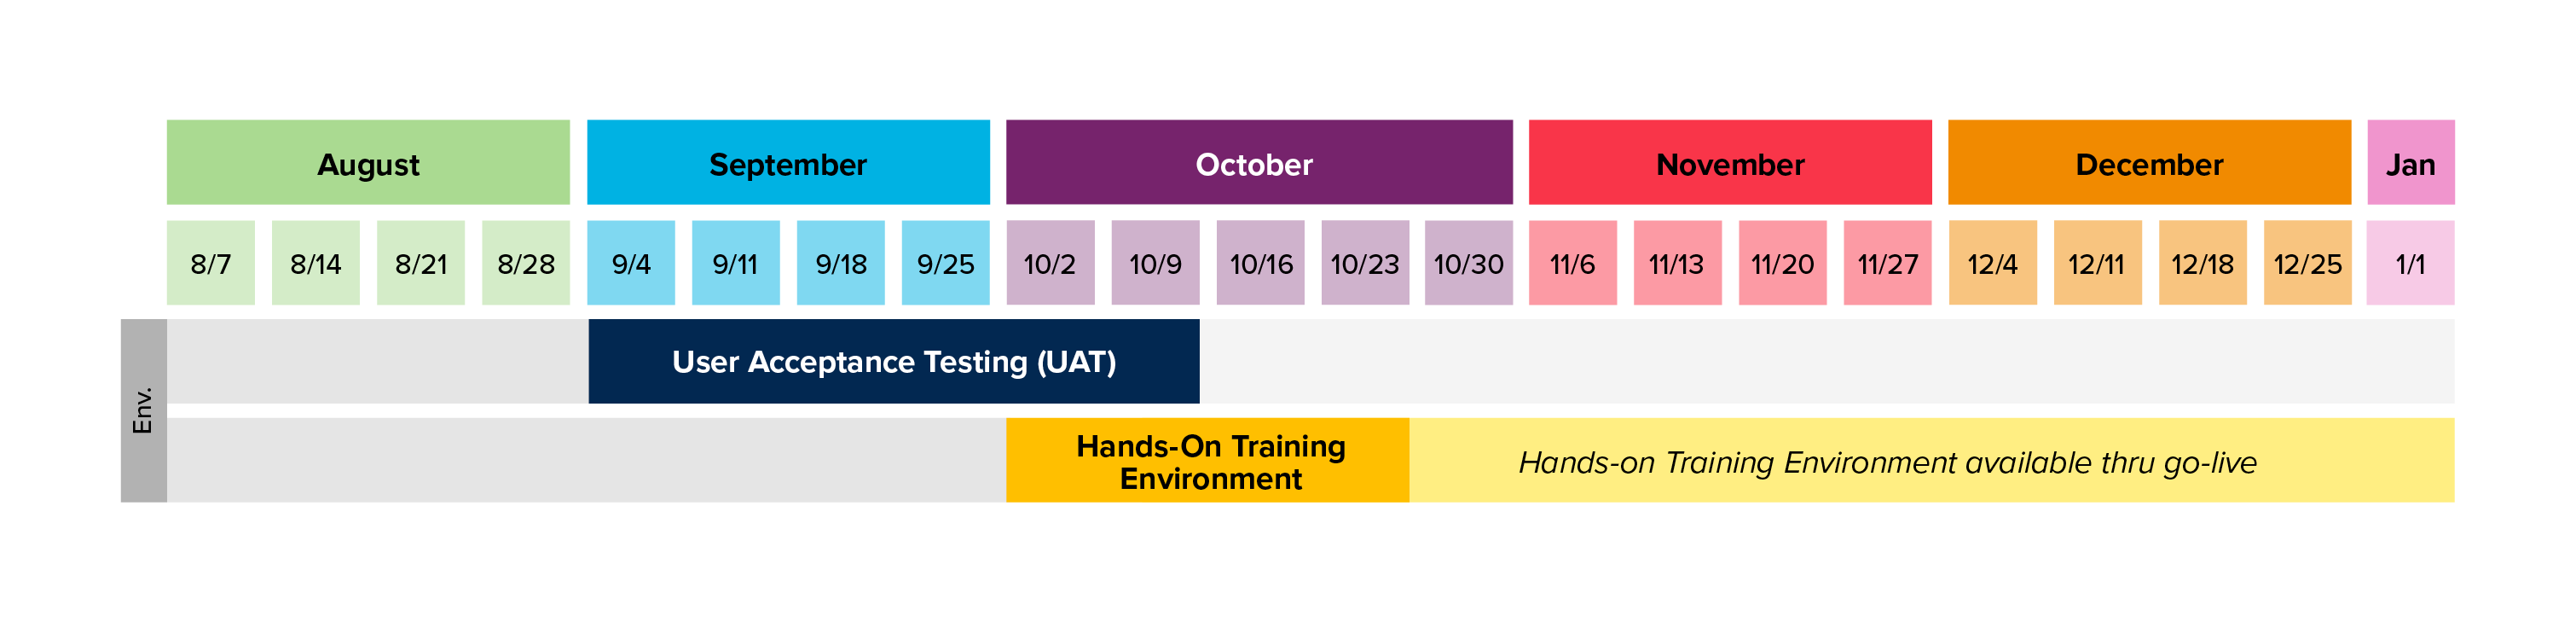 User Acceptance Testing and Hands-on Training Environment Timeline